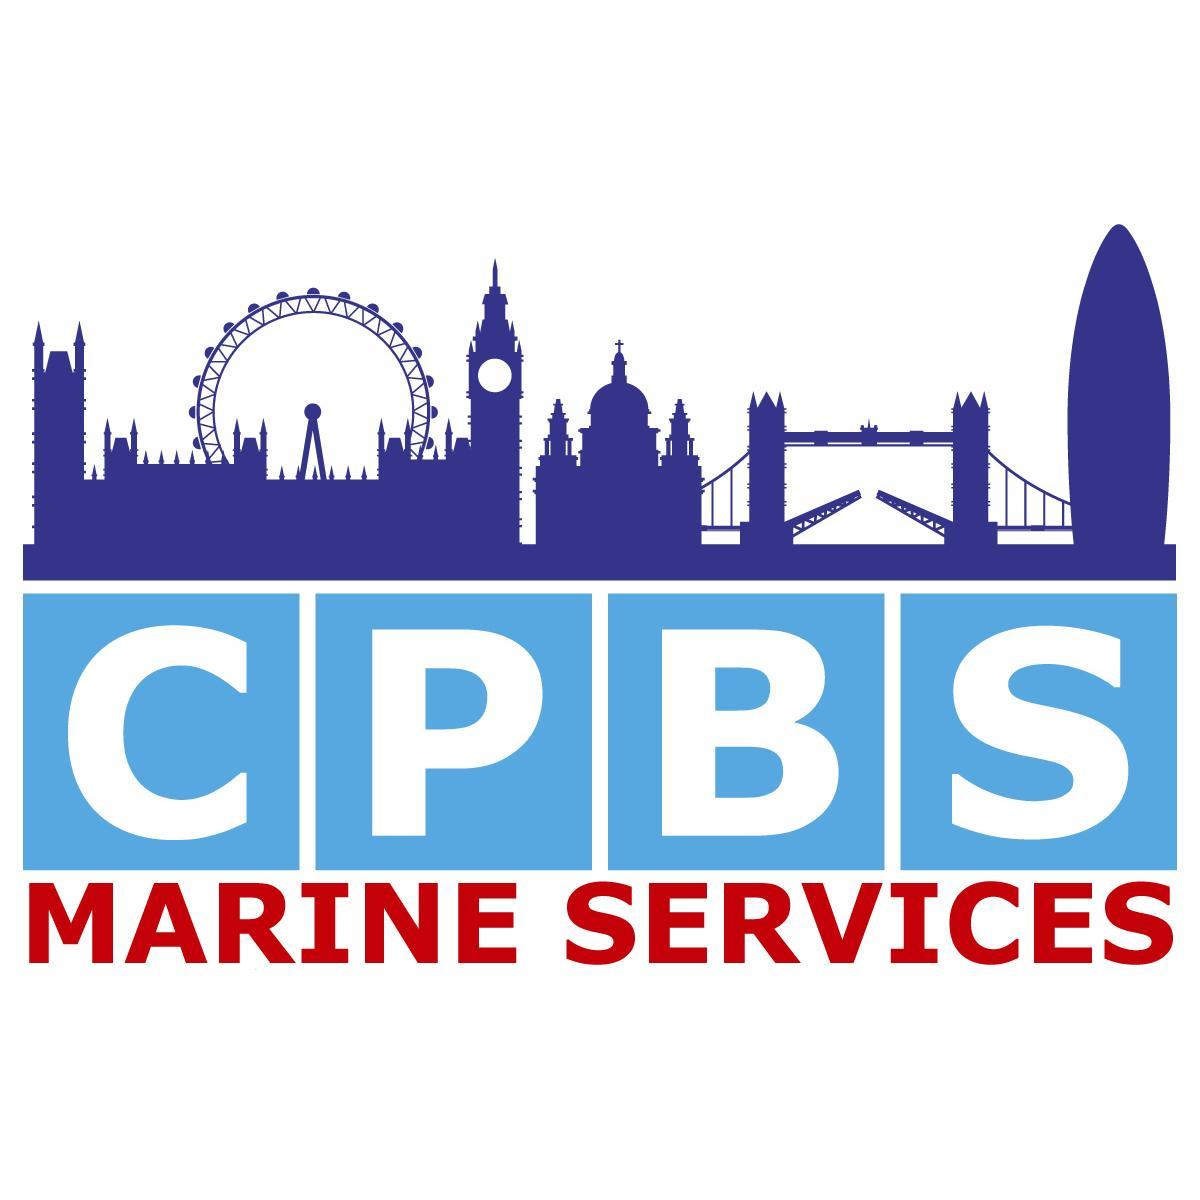 CPBS Marine Services operates mainly within the Port of London. We provide a wide range of tugs, multicats and workboats for use in a variety of marine roles.